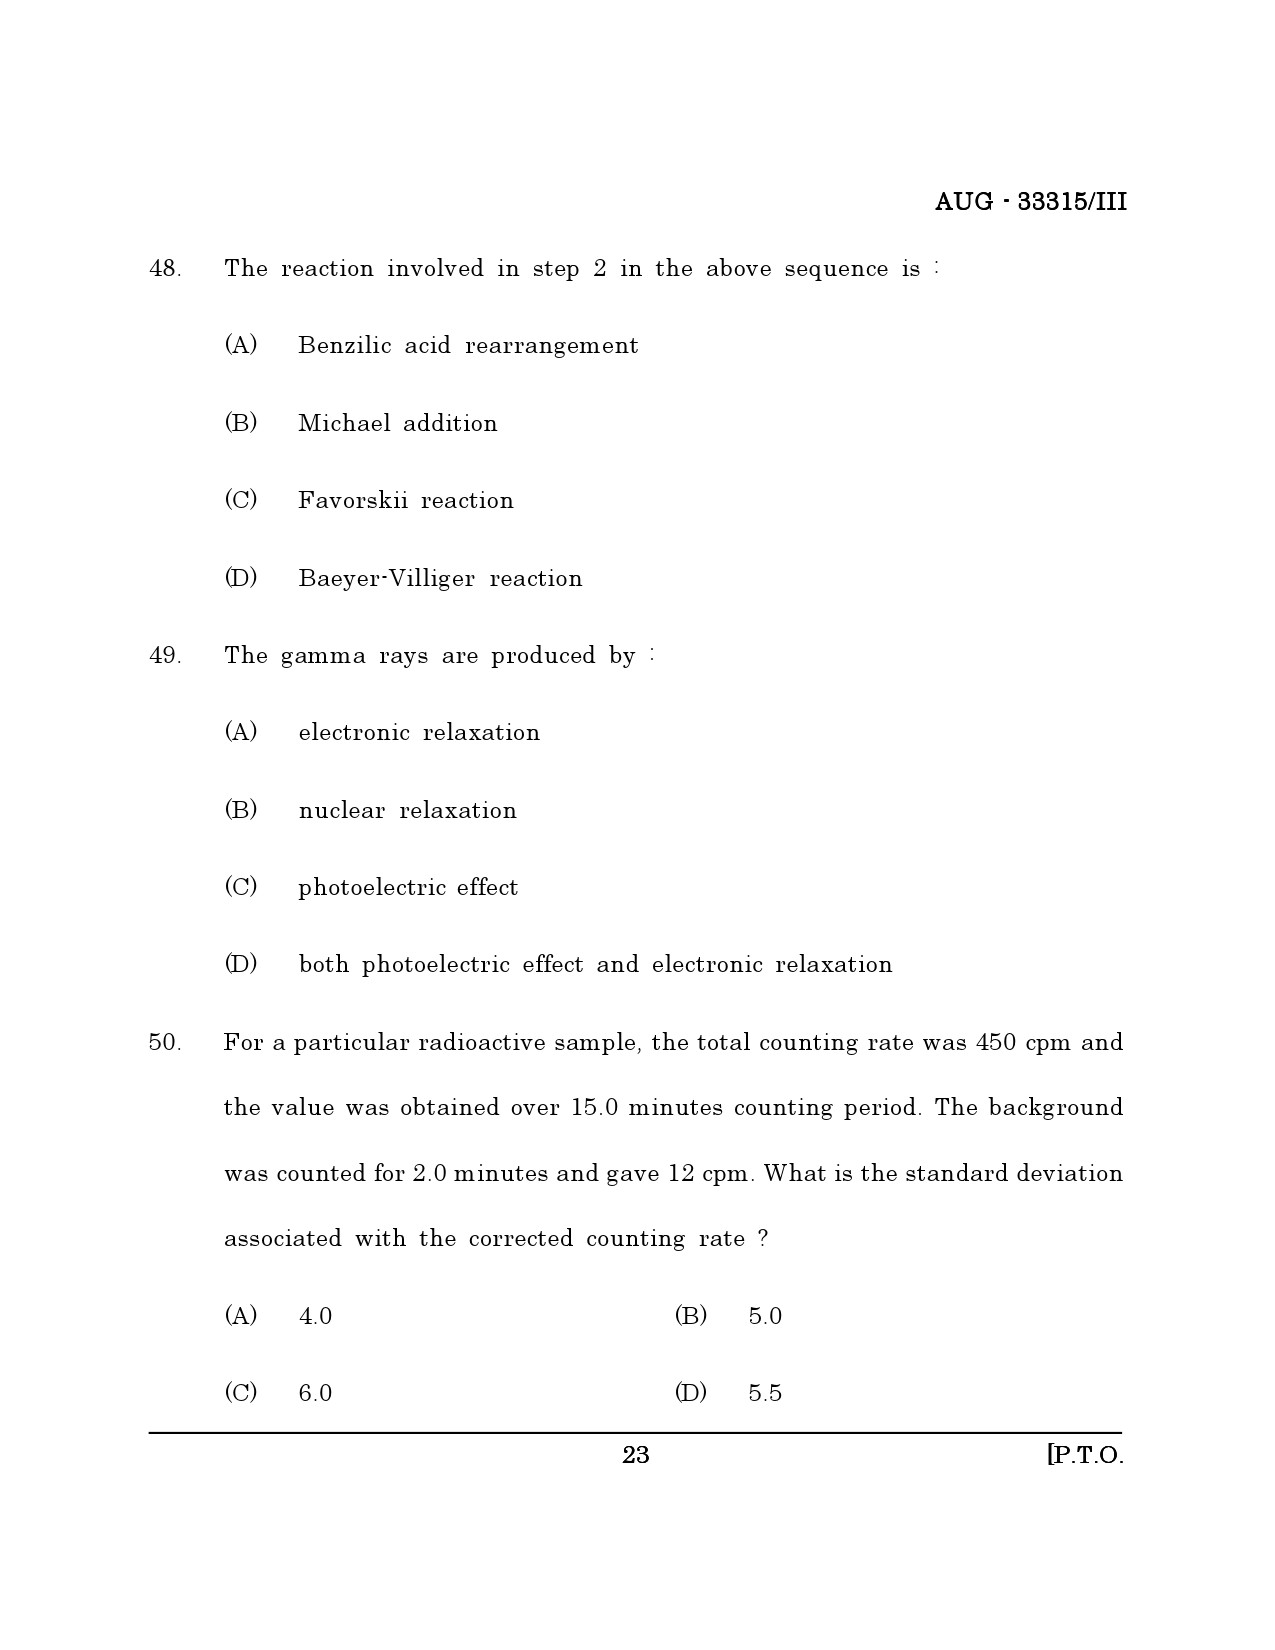 Maharashtra SET Chemical Sciences Question Paper III August 2015 22